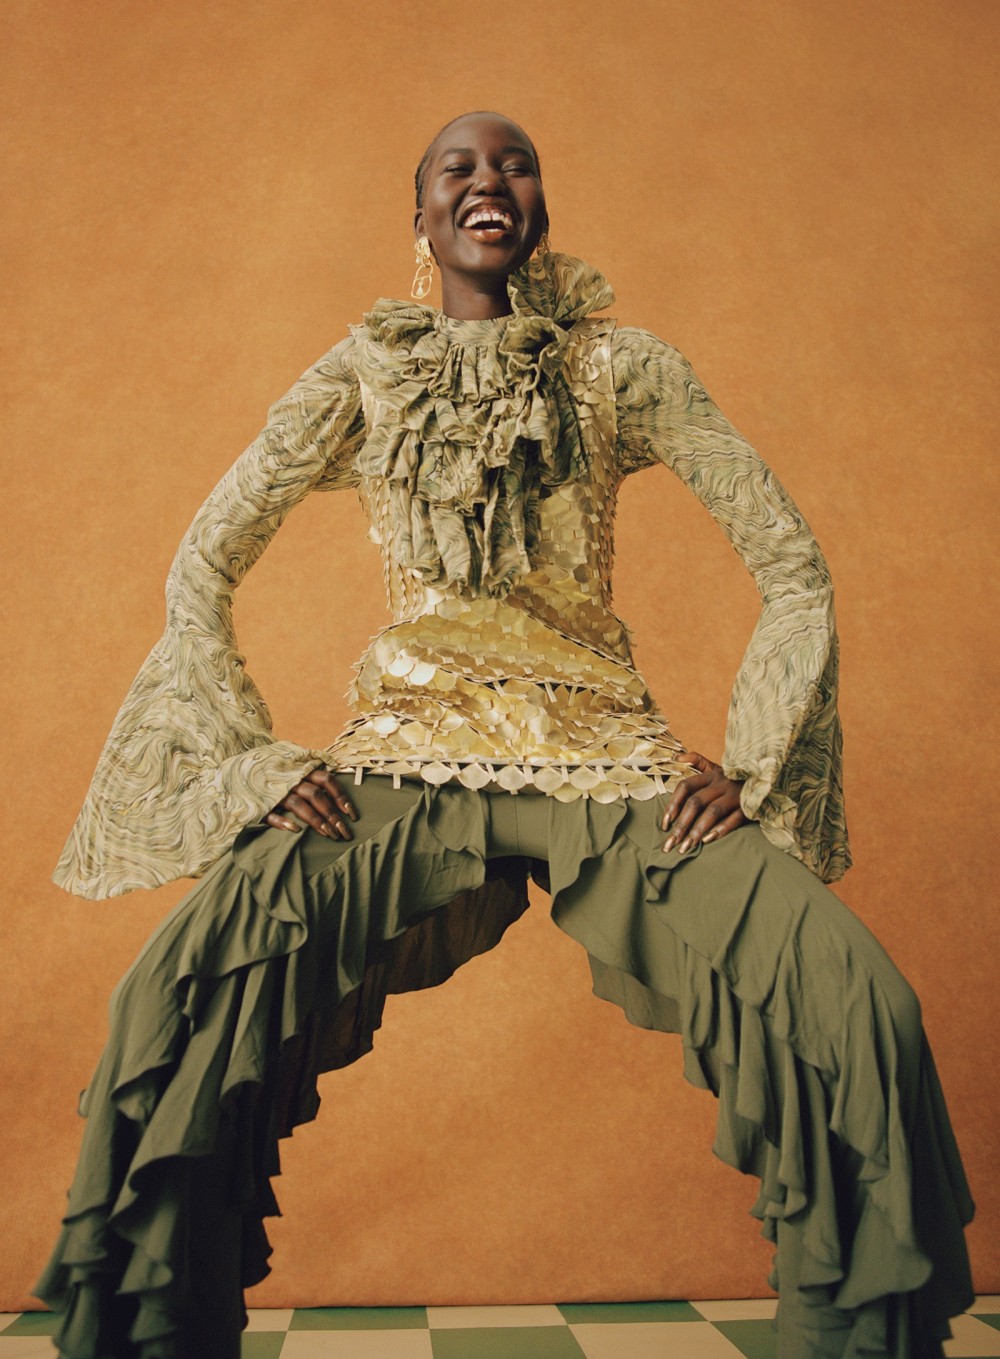 Akech has evidently taken a shine to this JW Anderson metallic tunic ruffled top and jersey pants  jwanderson.com....